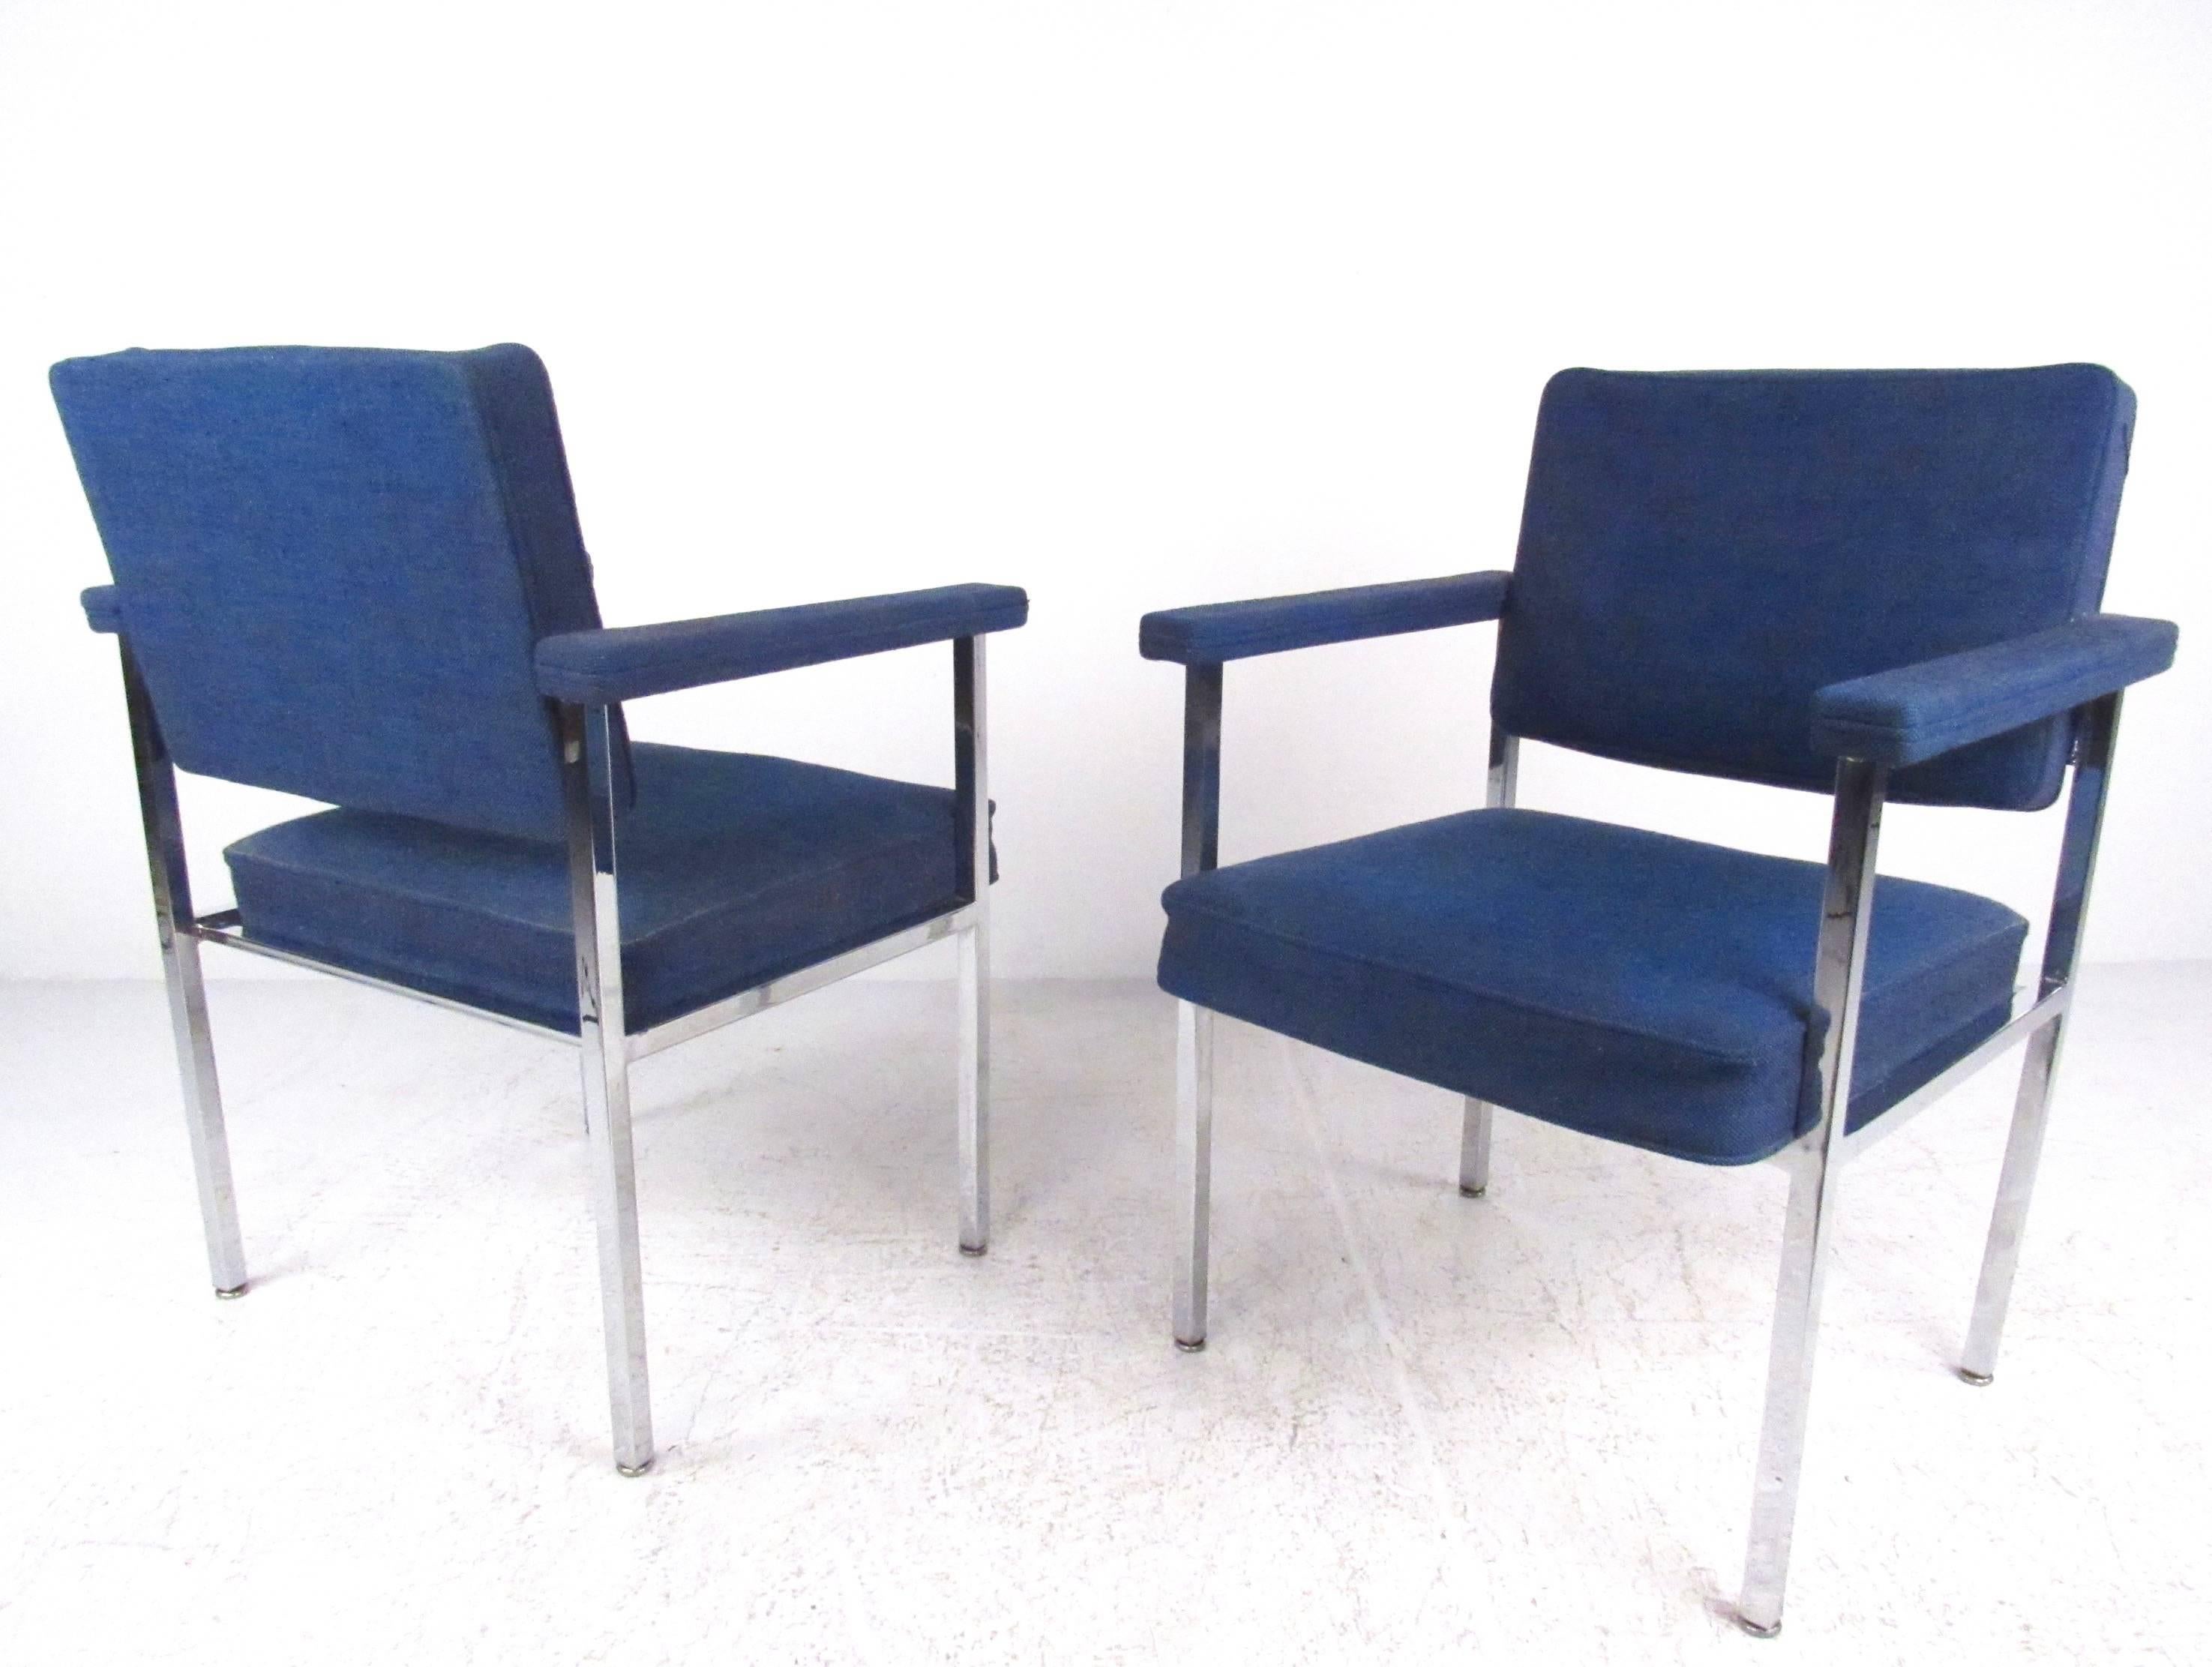 Pair of Mid-Century Modern Chrome Armchairs In Good Condition For Sale In Brooklyn, NY